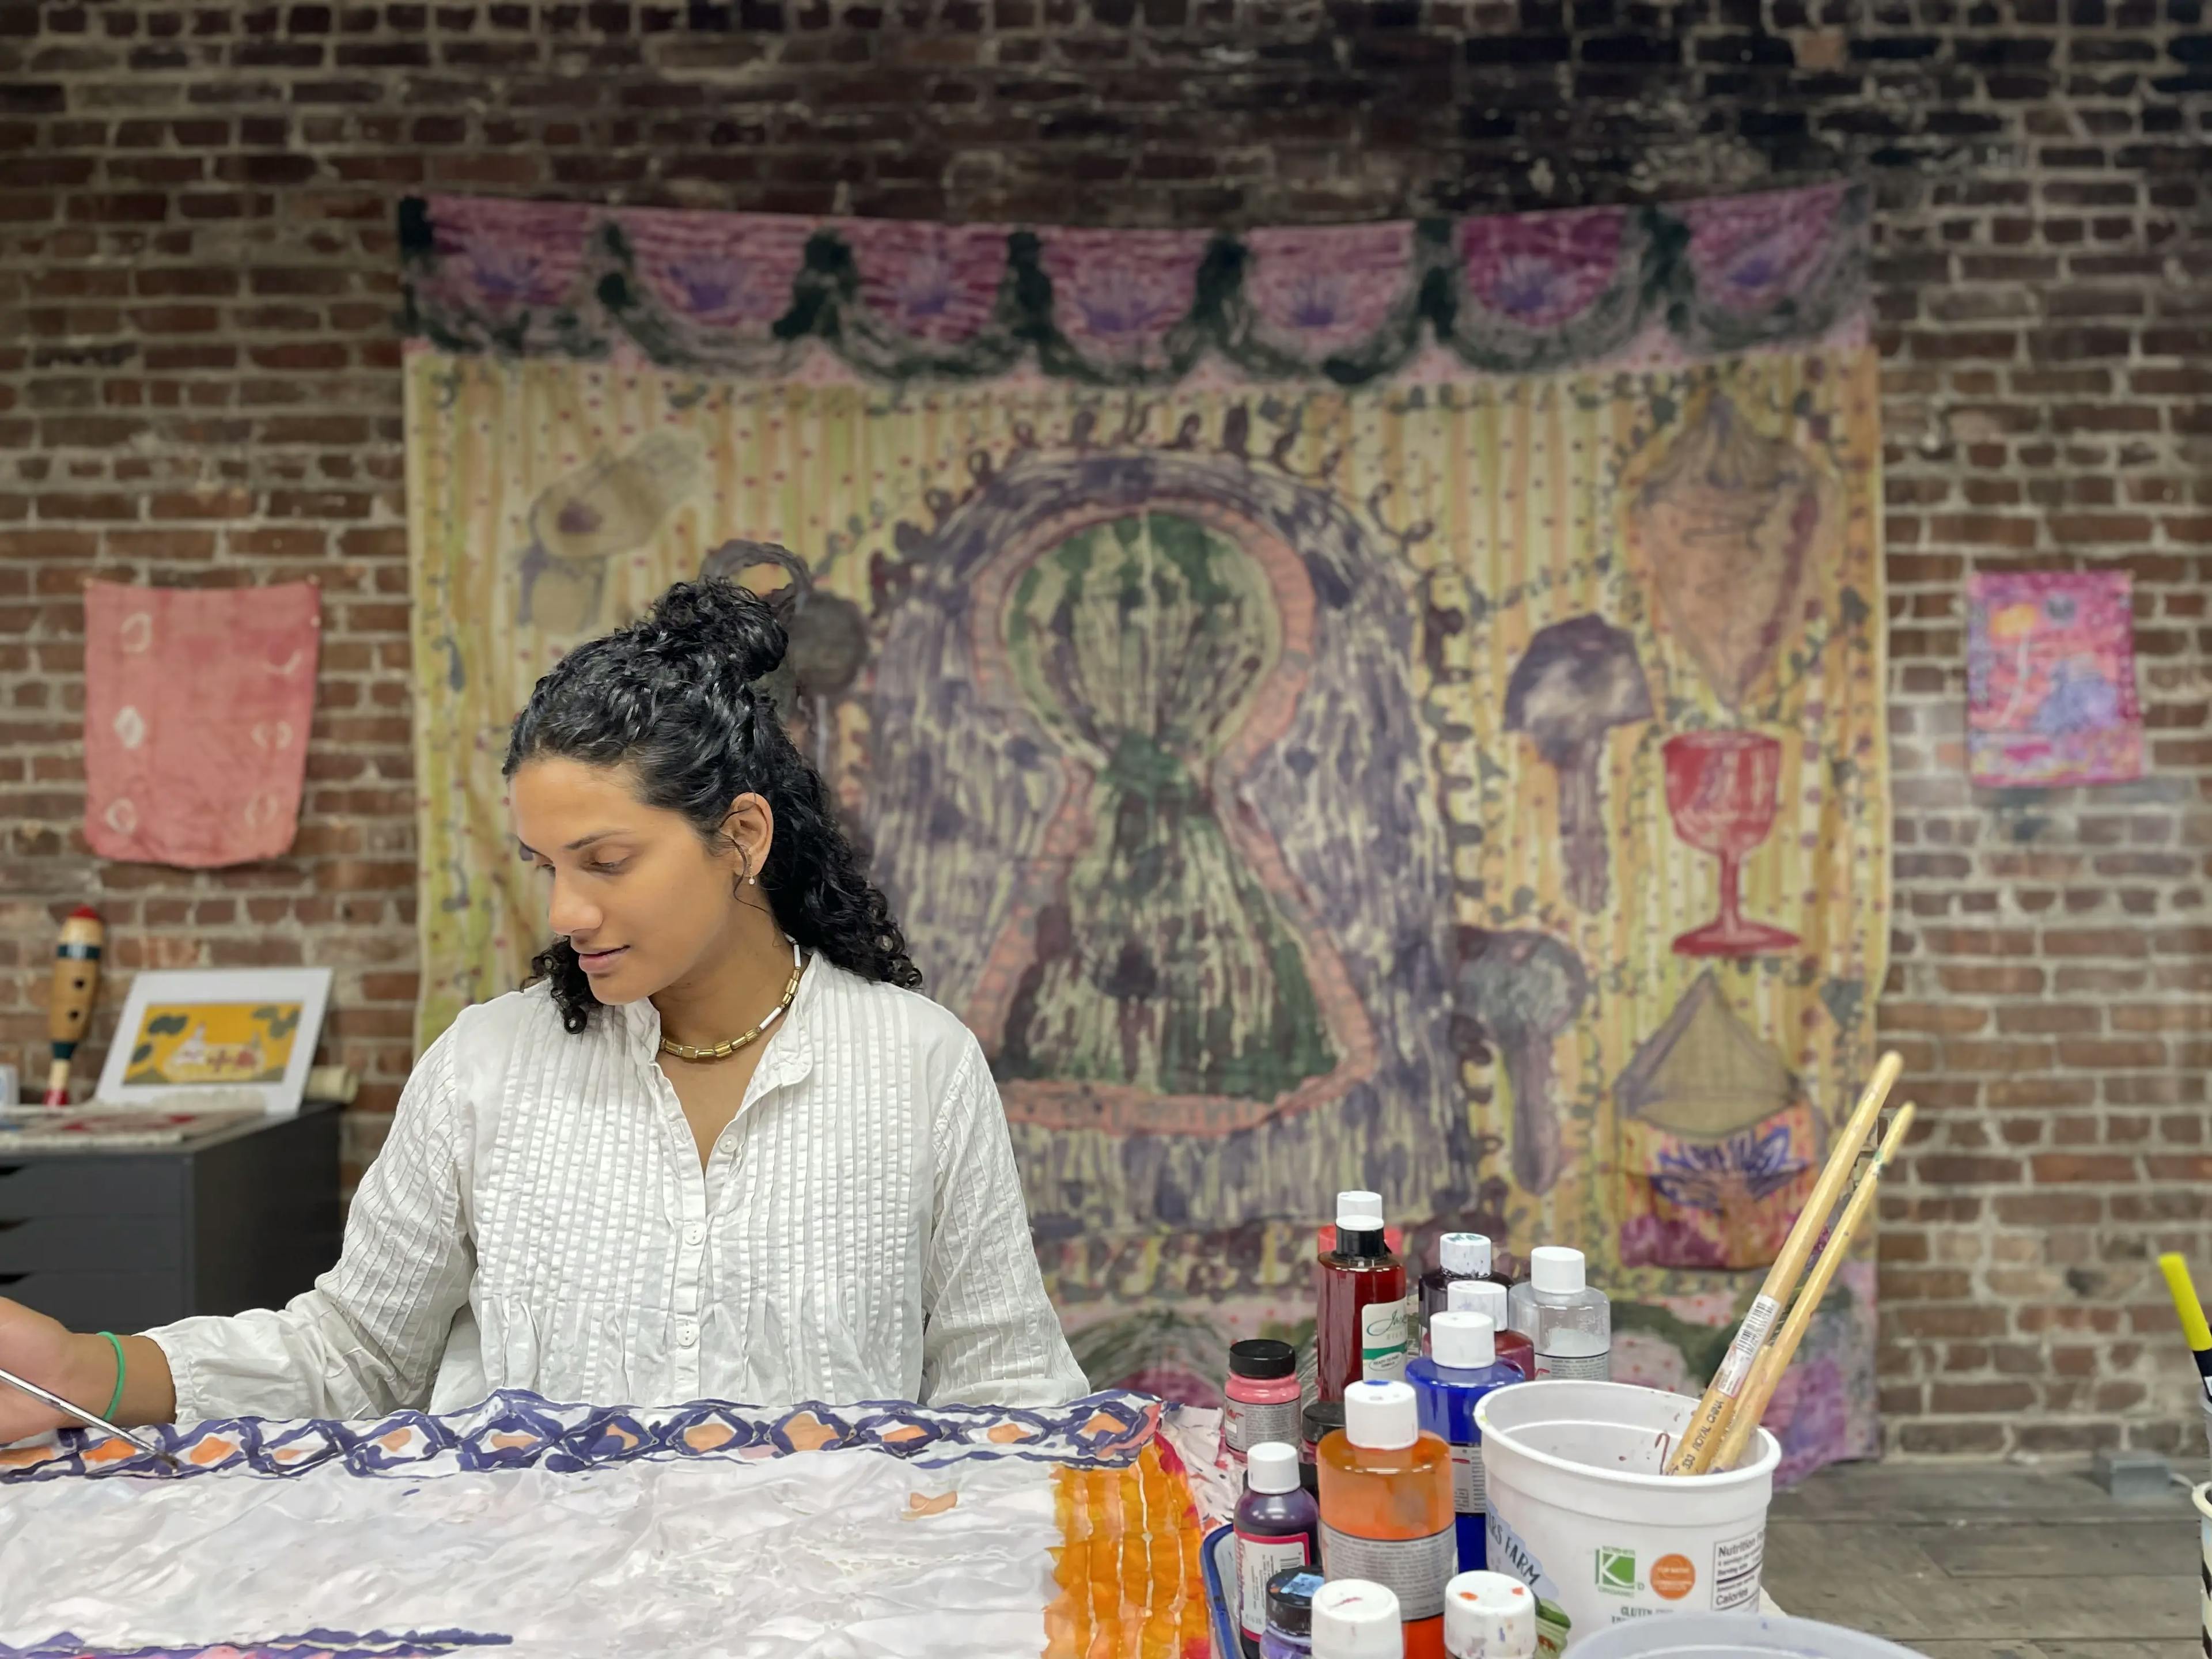 The artist Padma Rajendran working in her studio. The artist sits at a table painting on silk while one of her completed large scale silk paintings hangs behind her.